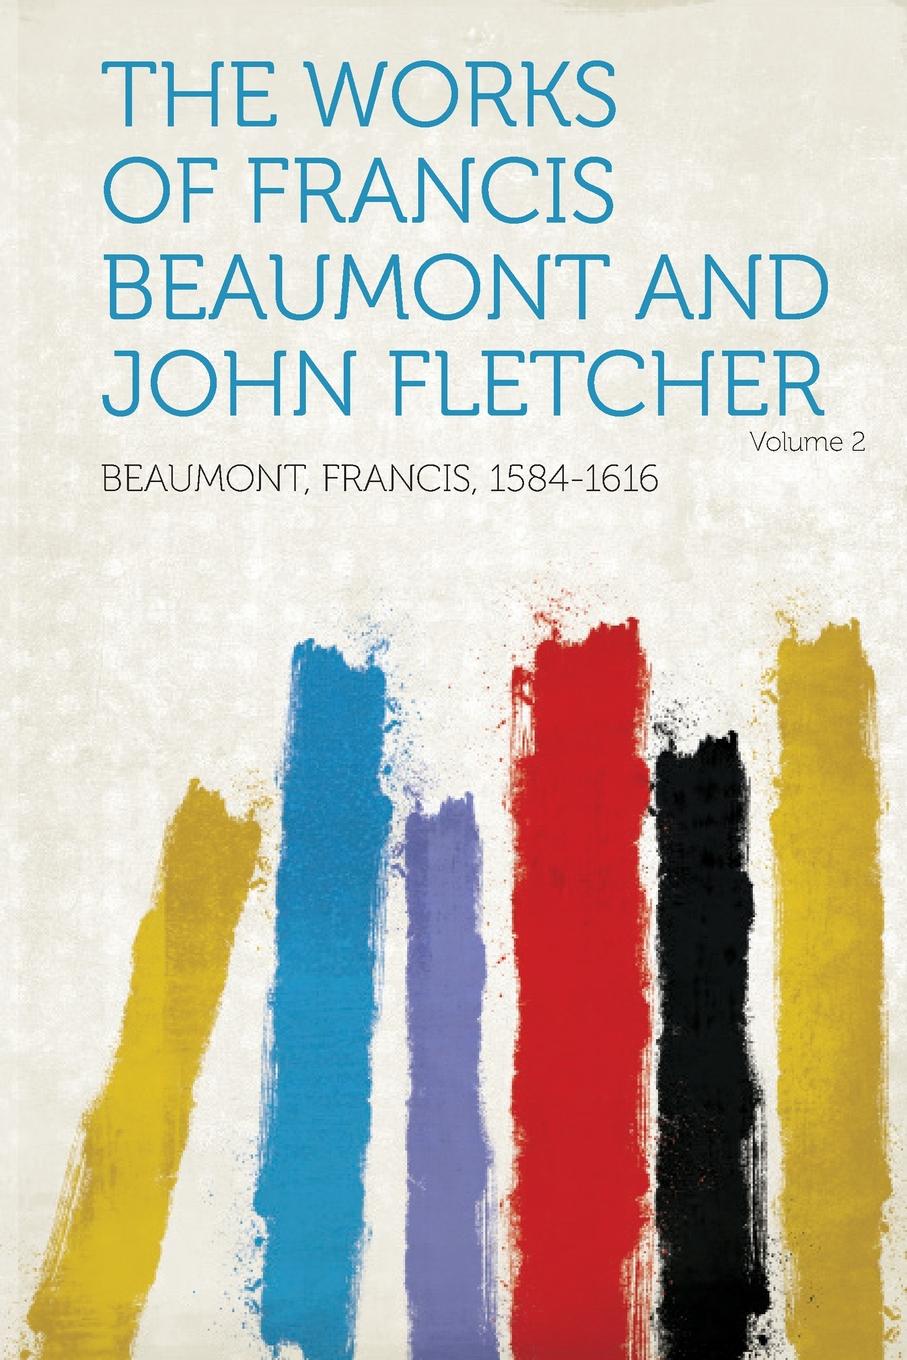 The Works of Francis Beaumont and John Fletcher Volume 2